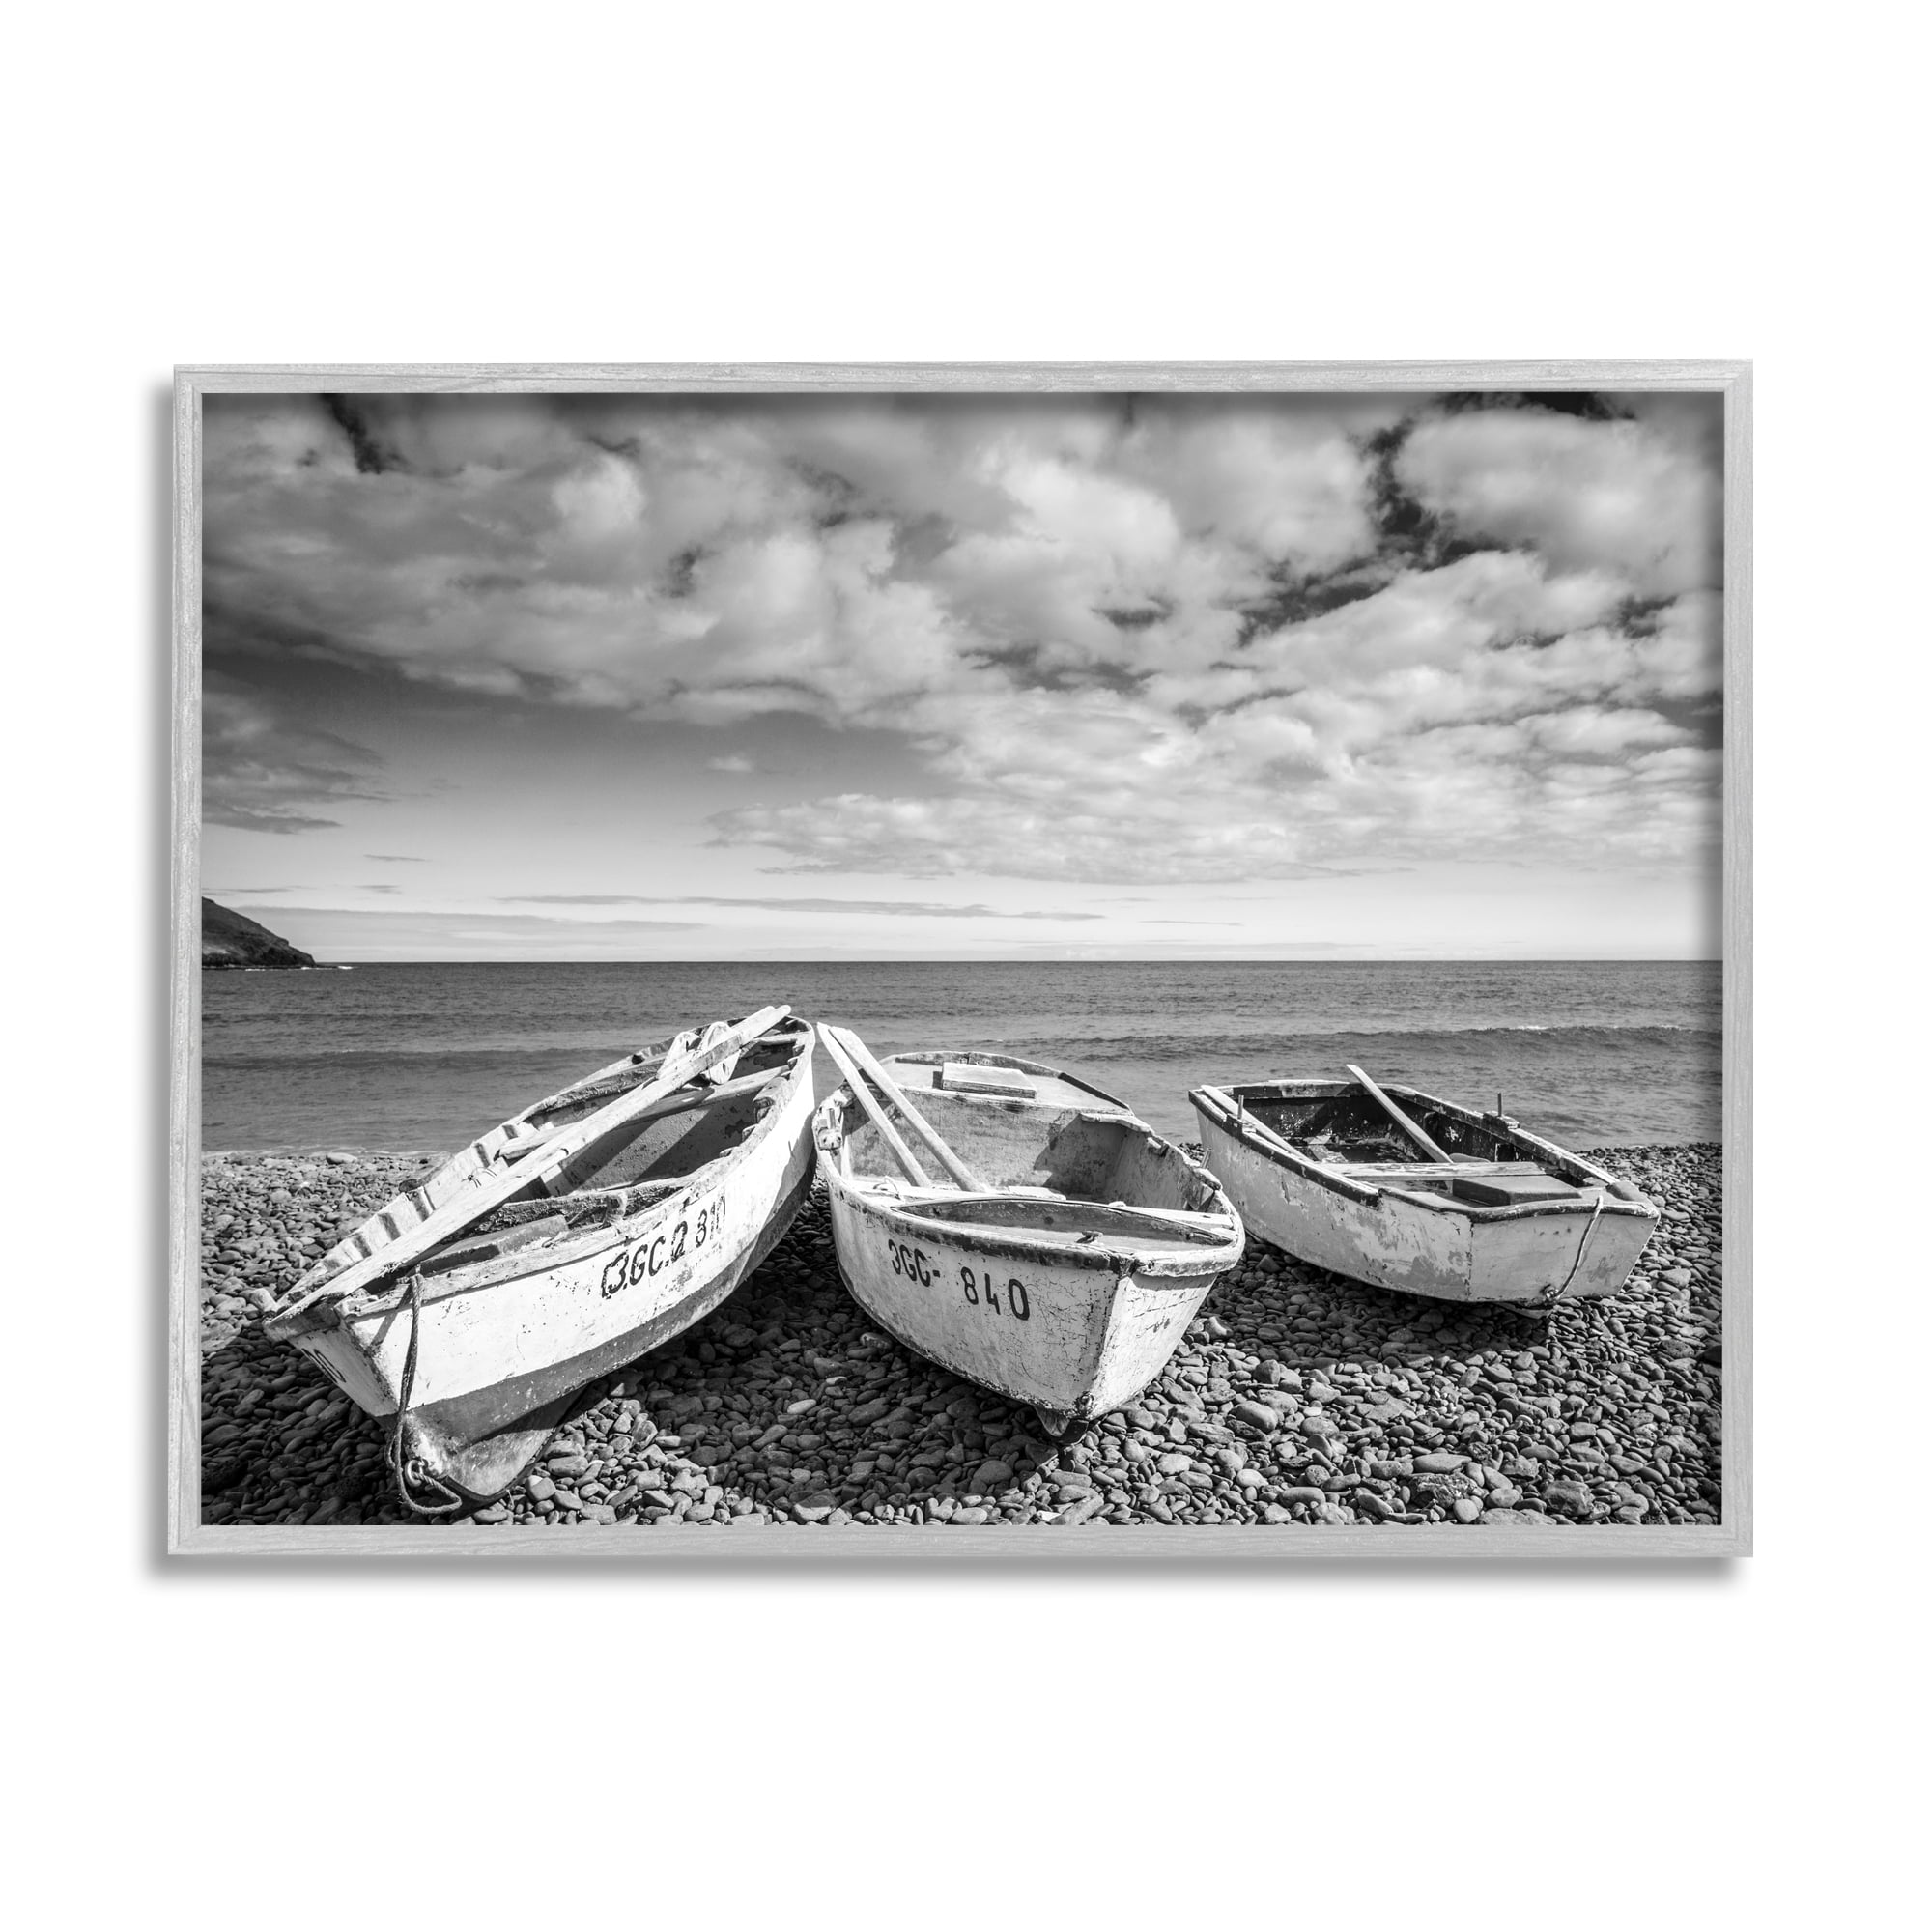 Vintage rowboats On Rocky Beach Shore Nautical 30 in x 24 in Framed Photography Art Prints, by Stupell Home Dcor, Size: 30 x 24